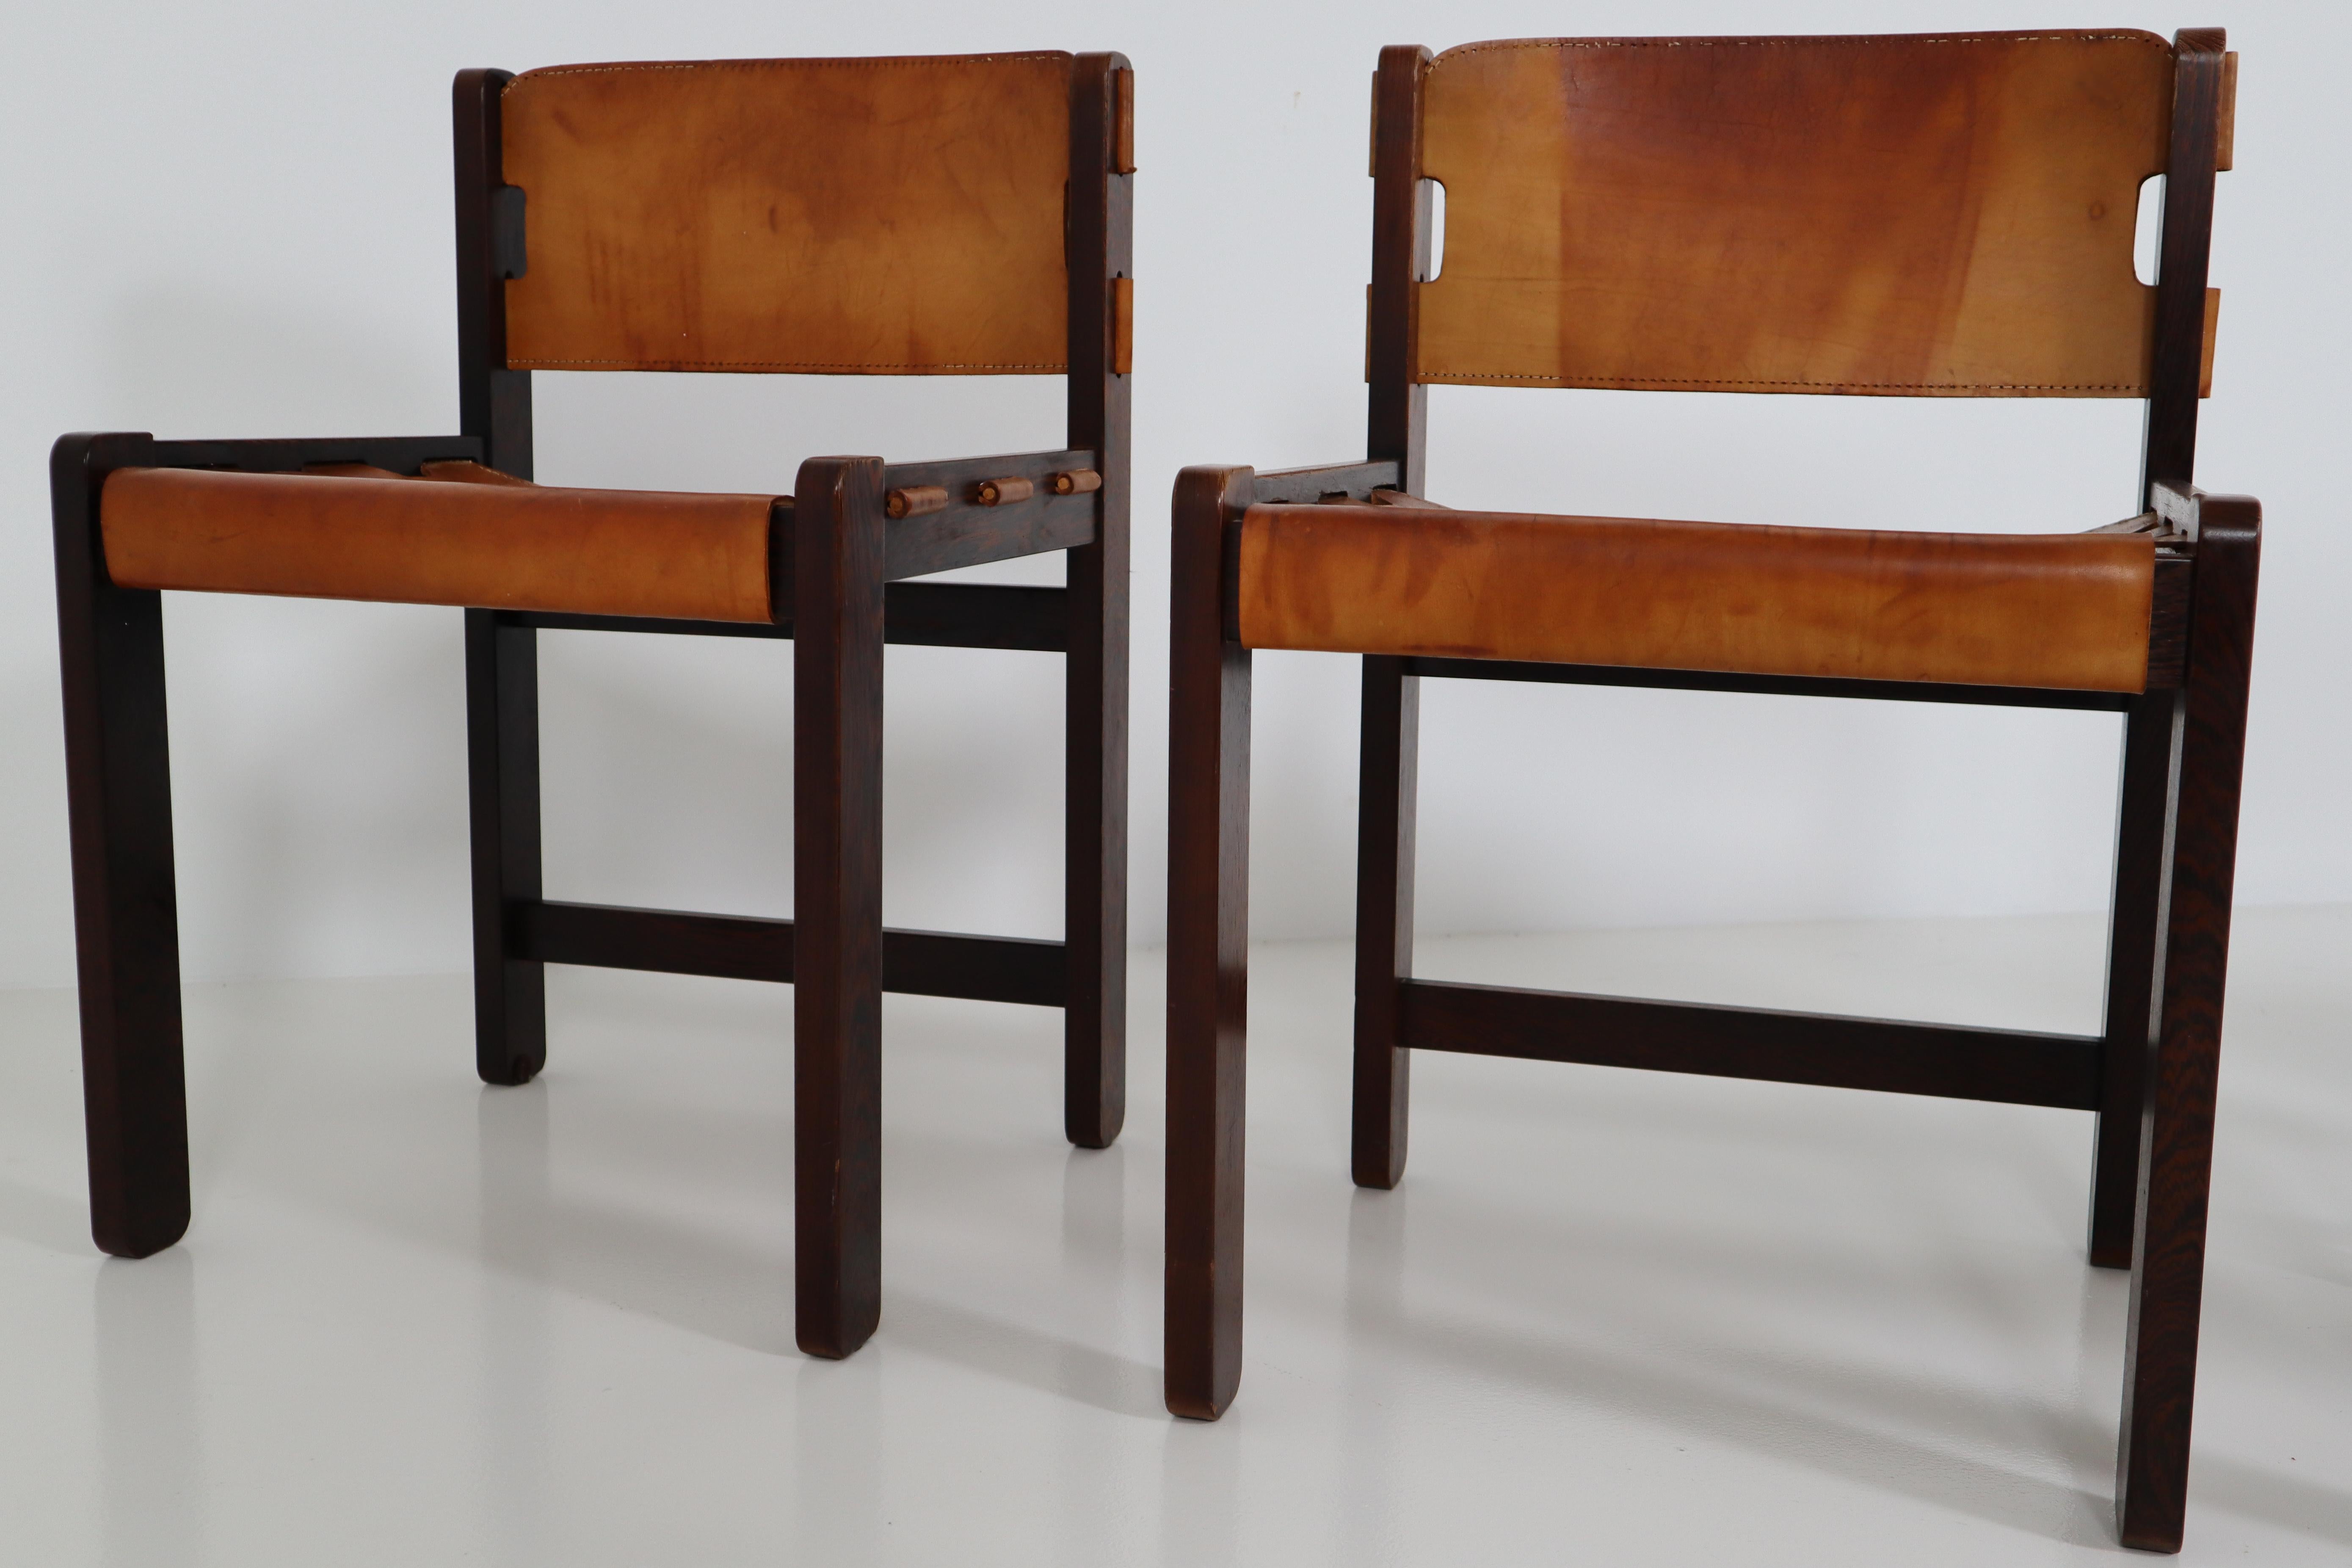 Set of six dining chairs in absolutely gorgeous thick cognac saddle leather, circa 1970s. This set was acquired from the original owners. Chairs are in vintage condition with incredible patina and natural wear to the leather - adds tons of character.